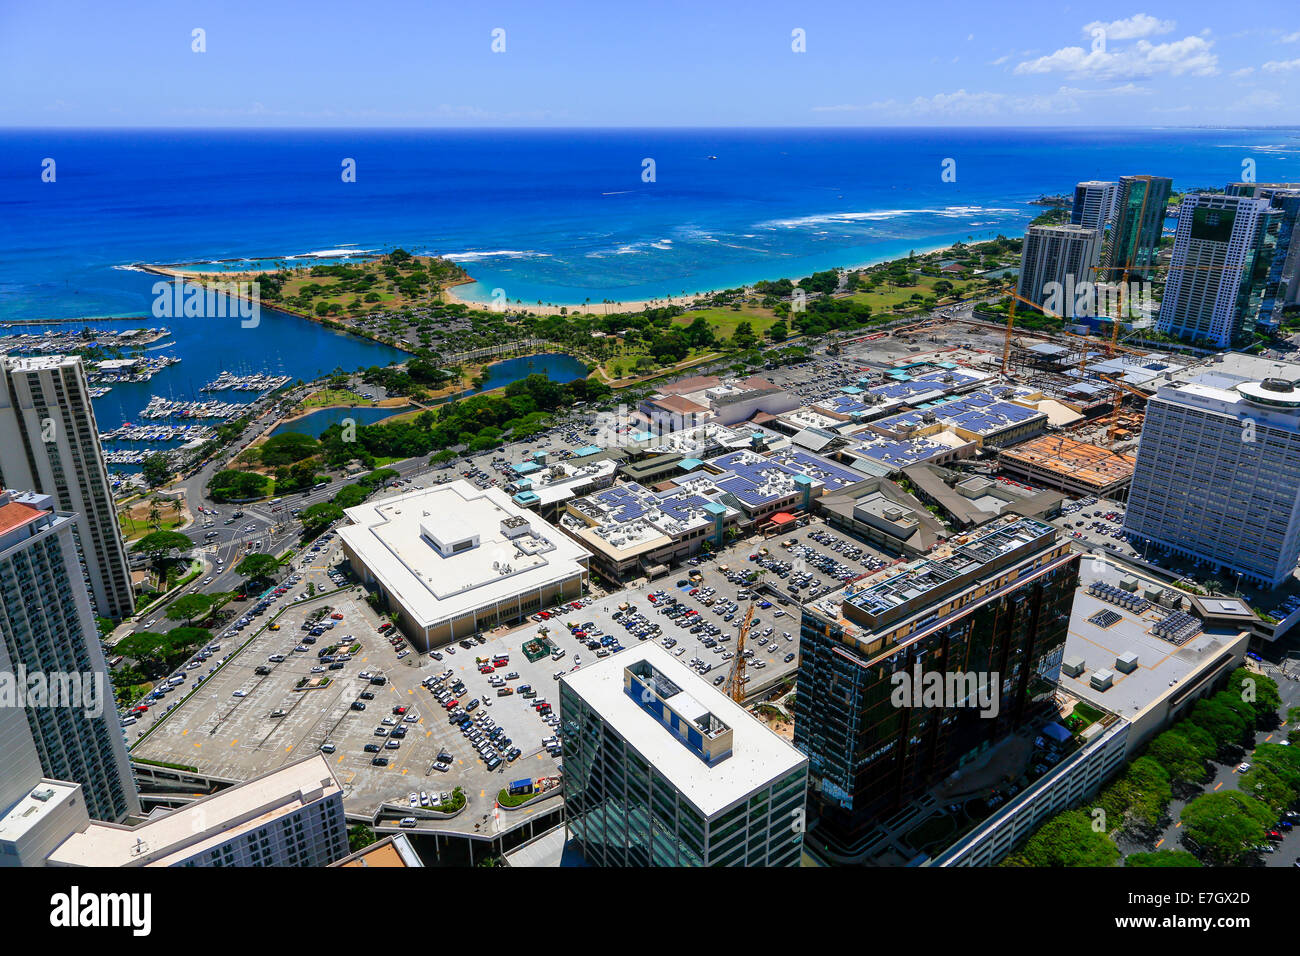 HONOLULU - AUGUST 7, 2014: Entrance To Neiman Marcus At The Ala Moana  Center Which Sells High-end Clothing And Feature Fancy Restaurants On  August 7, 2014. Stock Photo, Picture and Royalty Free Image. Image 32795452.